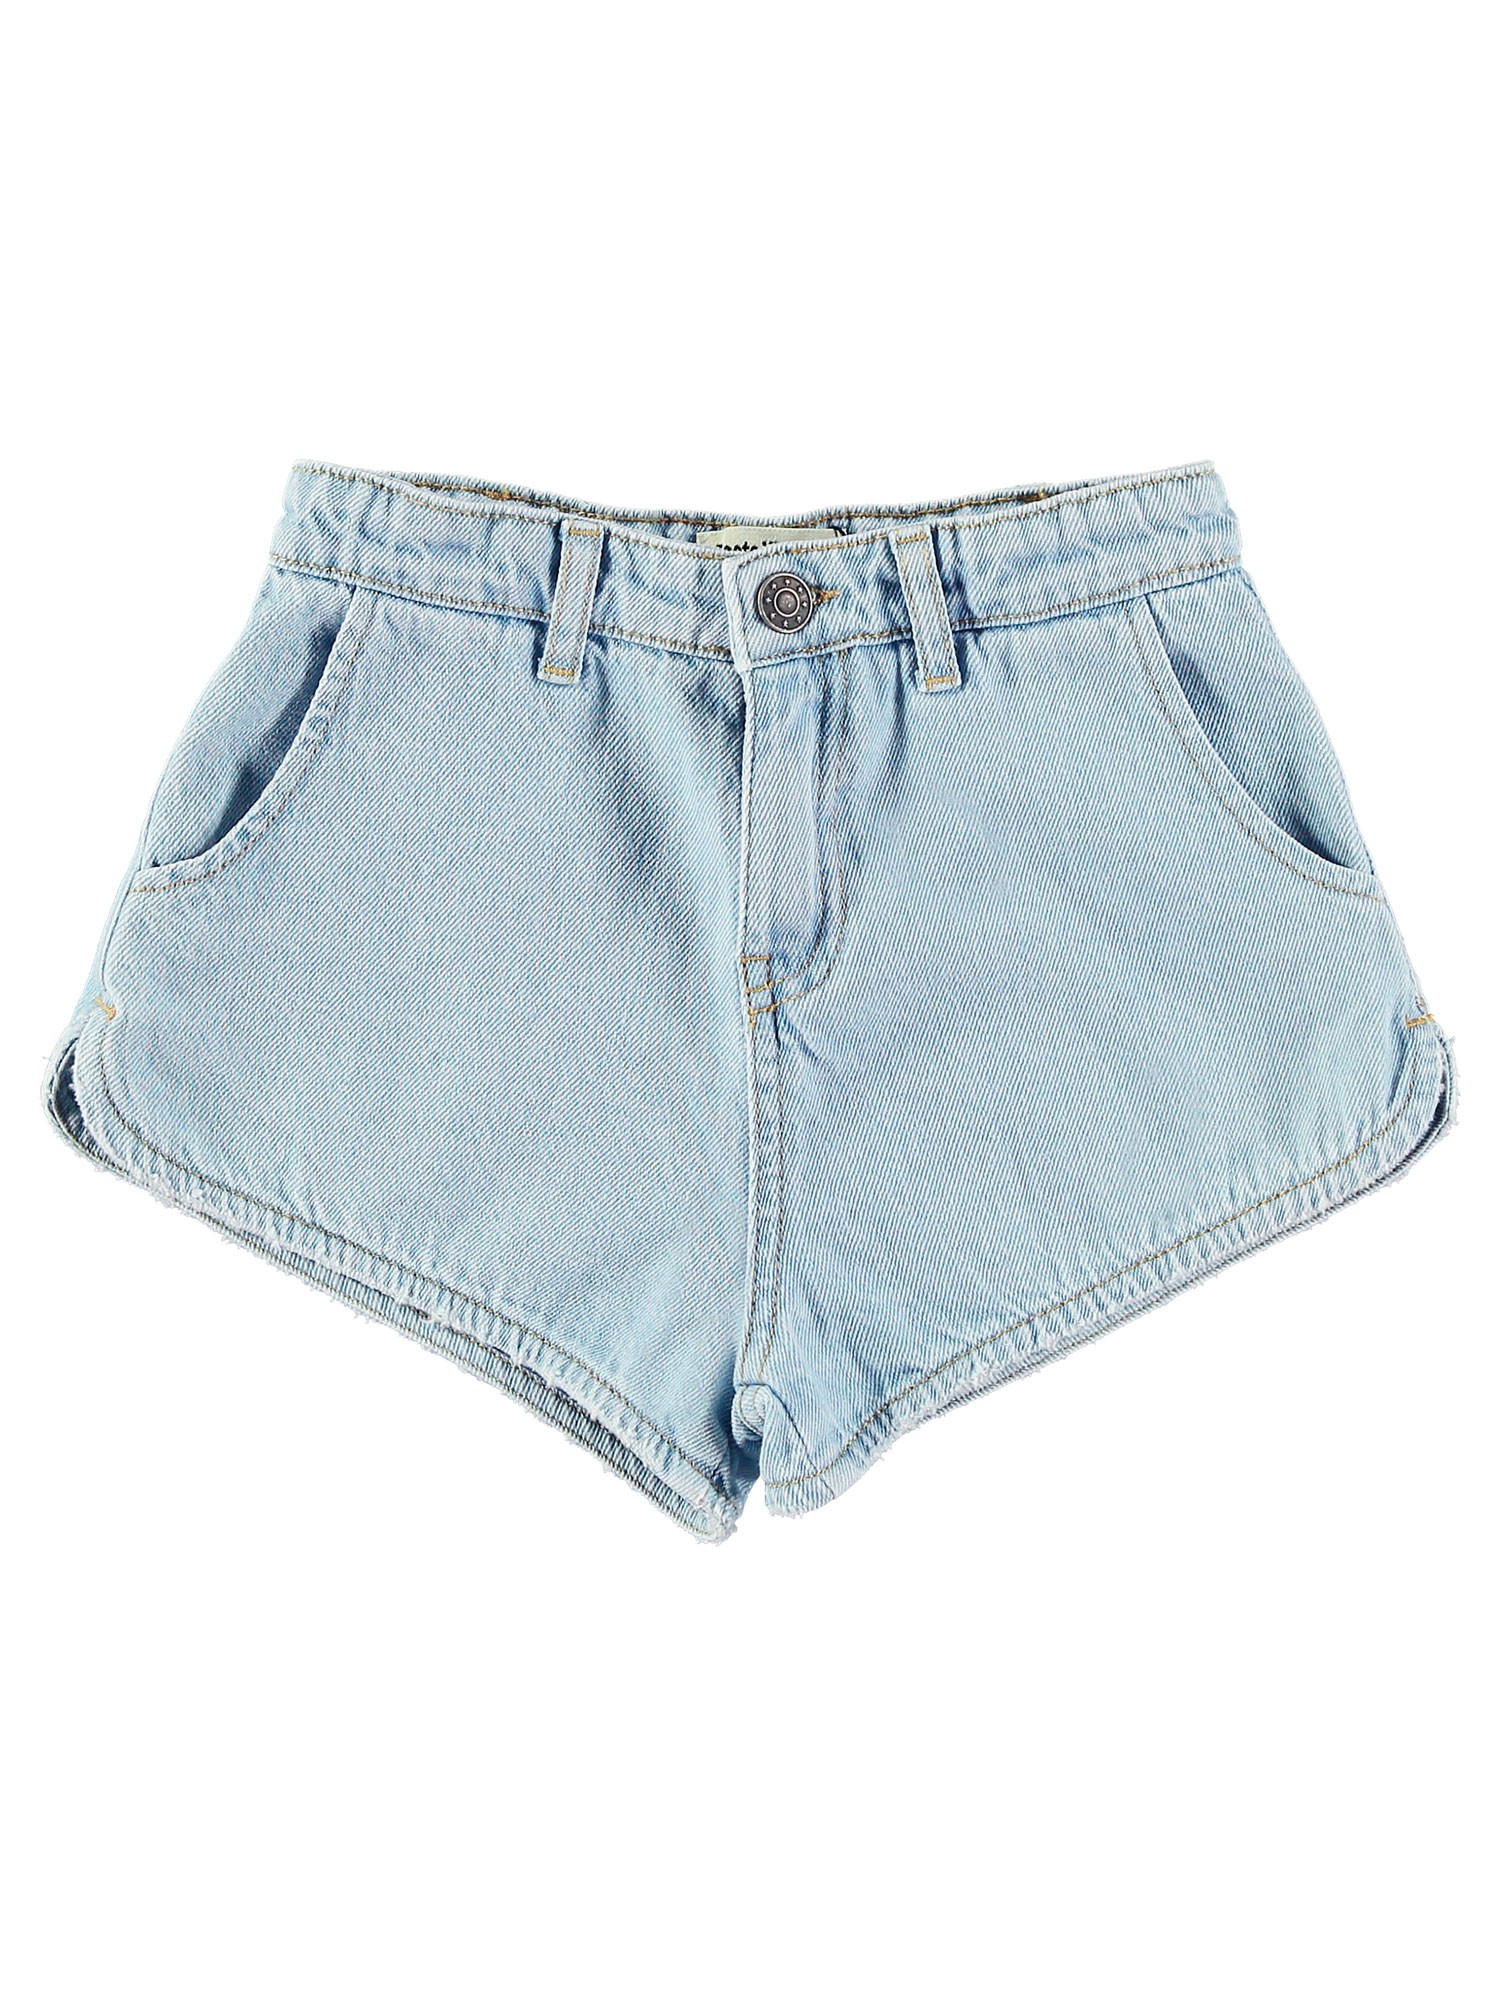 JEANS SHORTS 3